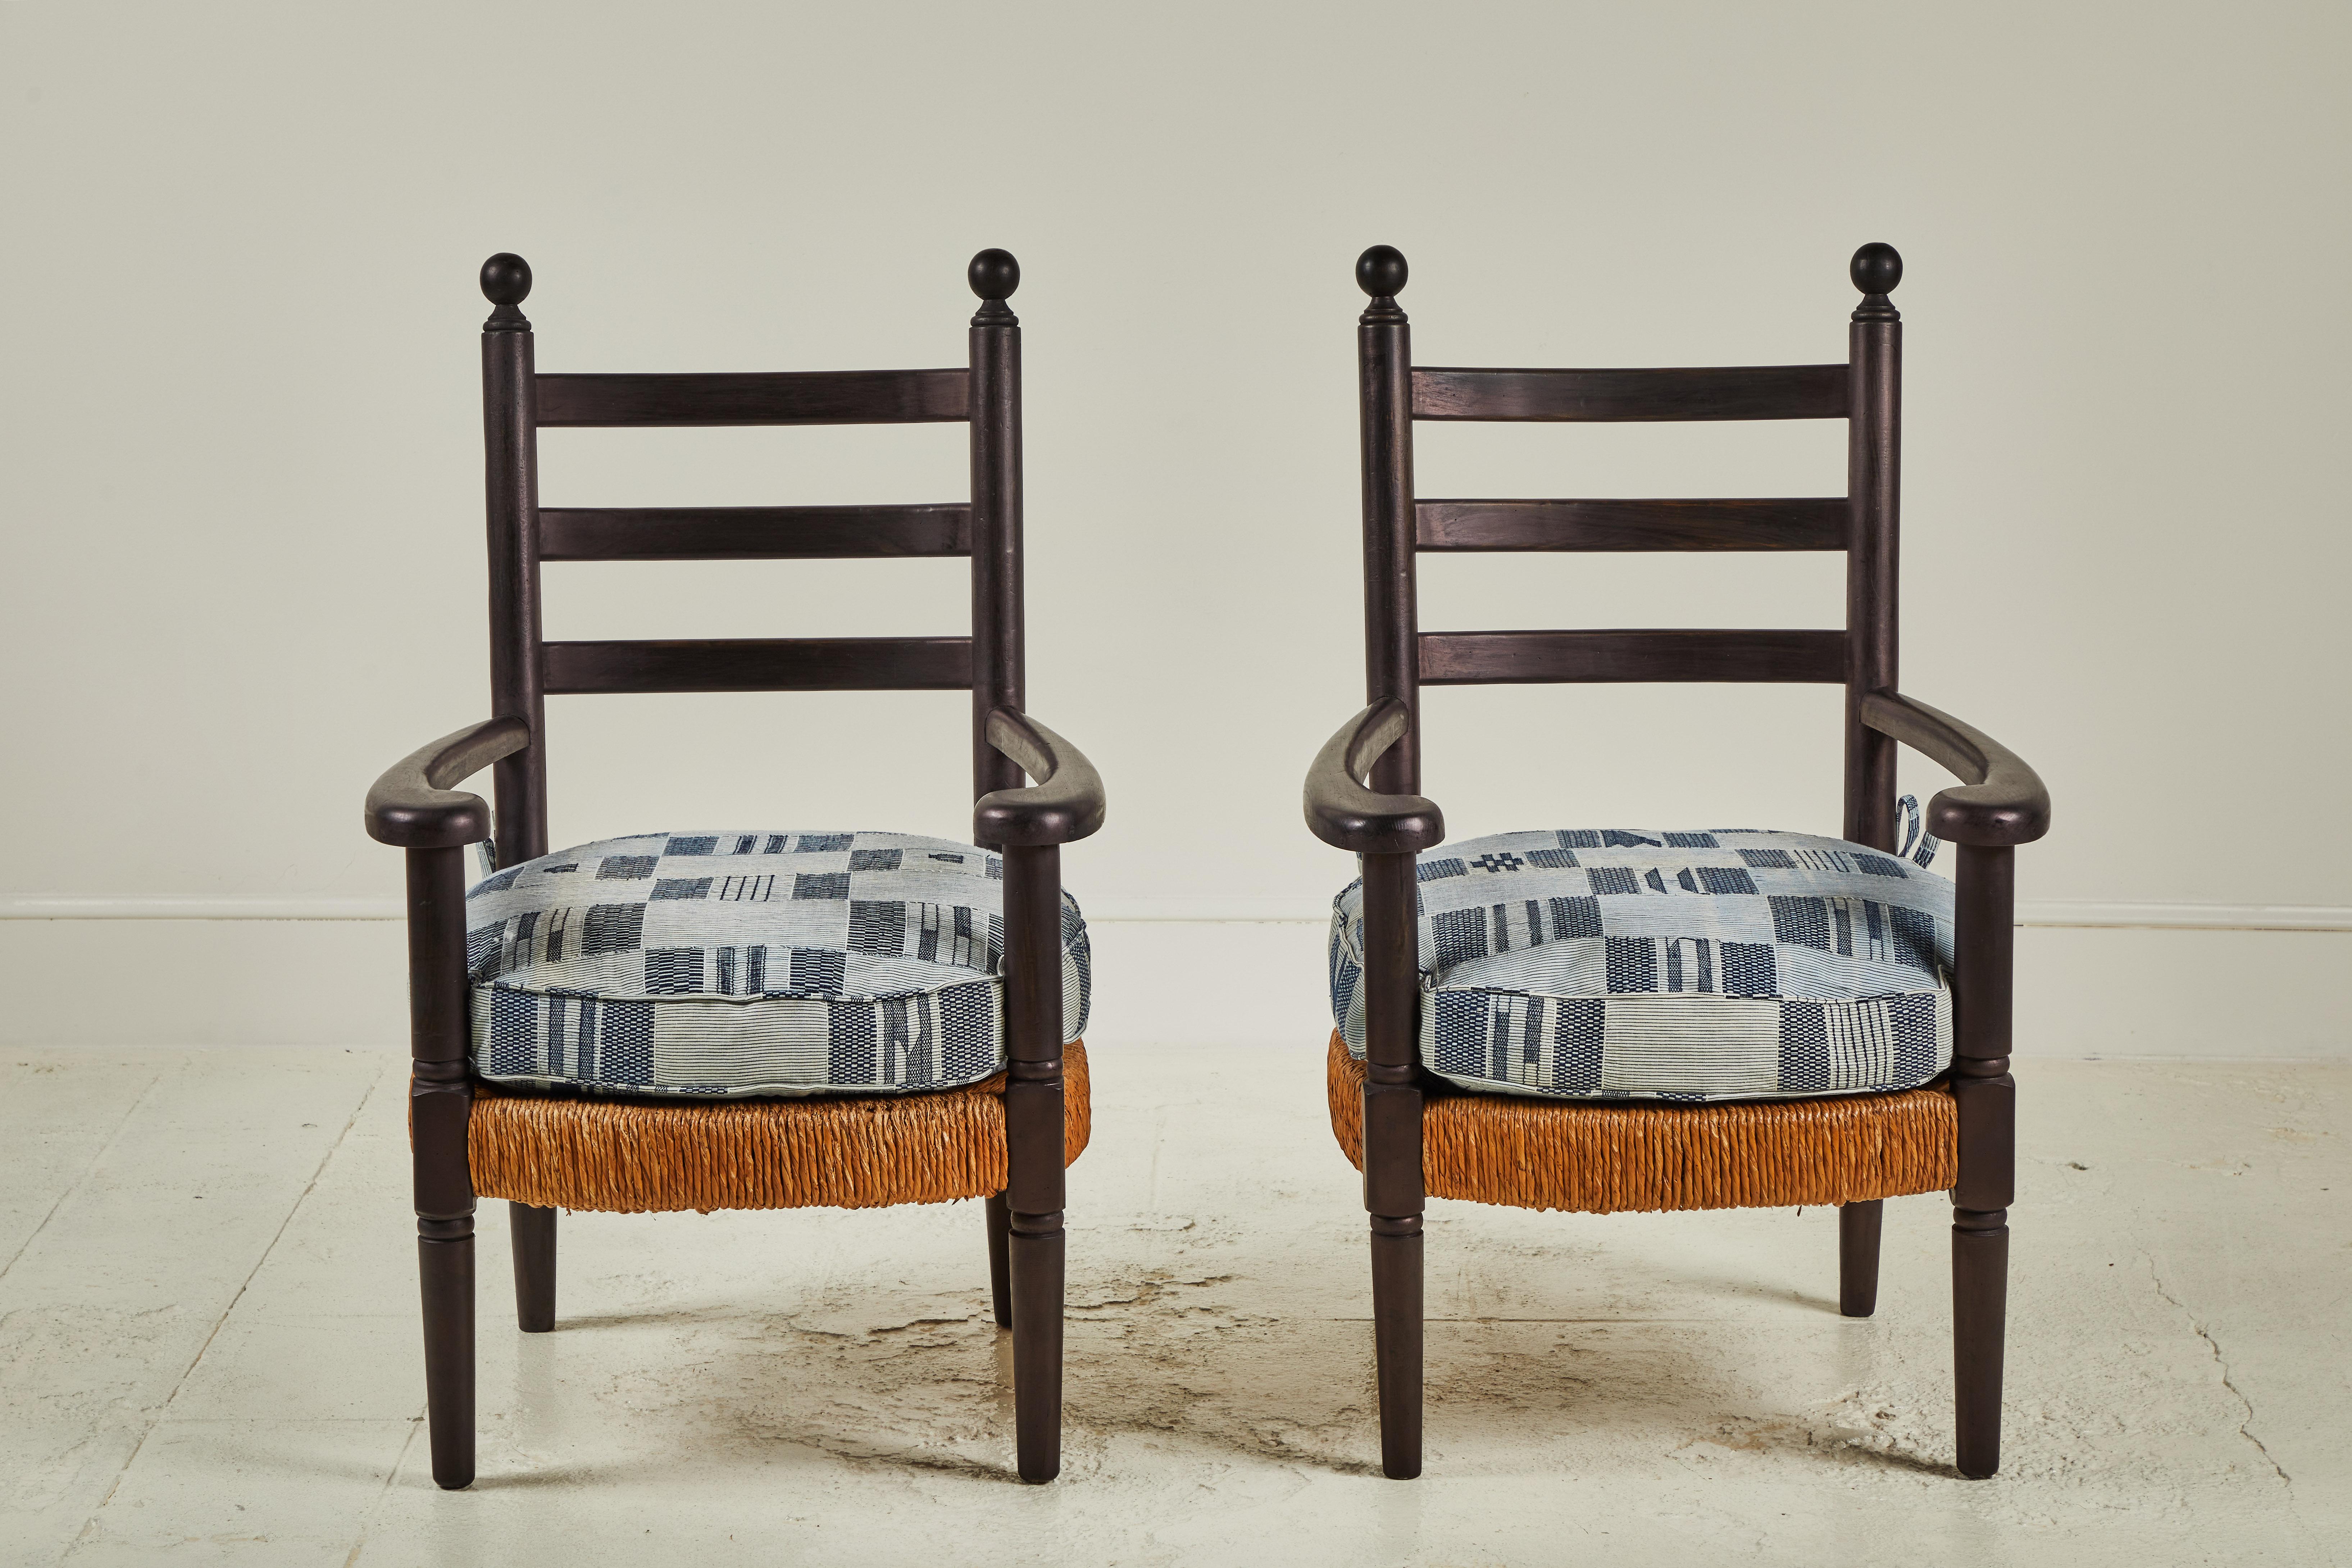 Pair of black wooden arm chairs with rush seats, blue and white seat cushions are made from vintage African textiles.